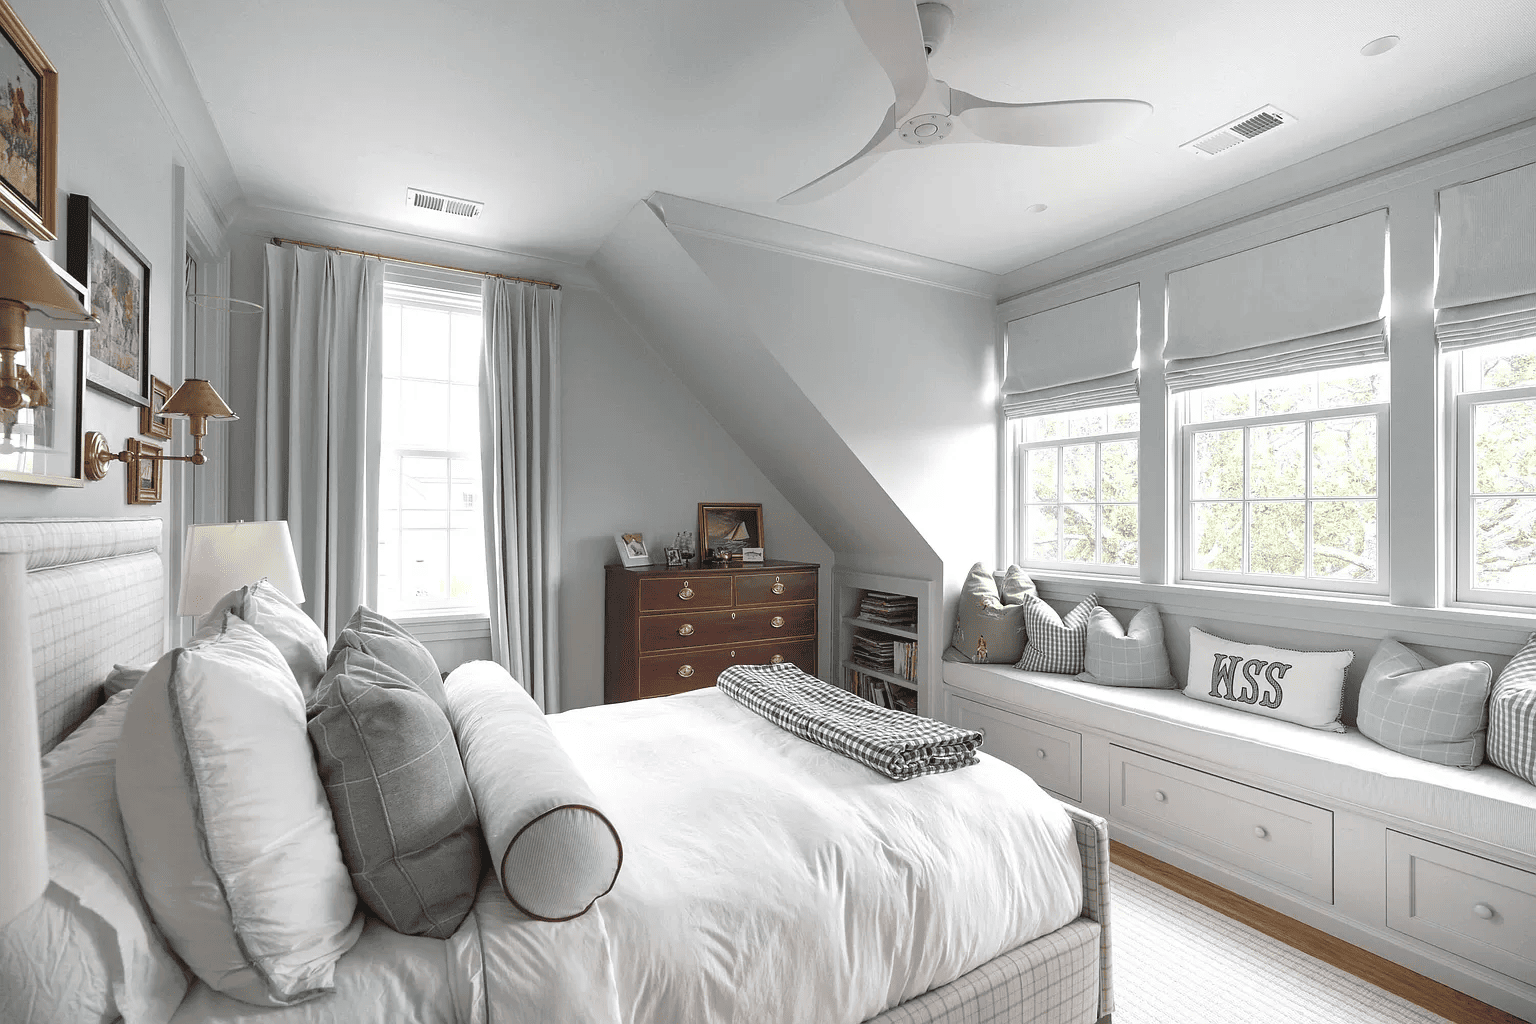 Traditional bedroom featured in Charleston Harbor home tour